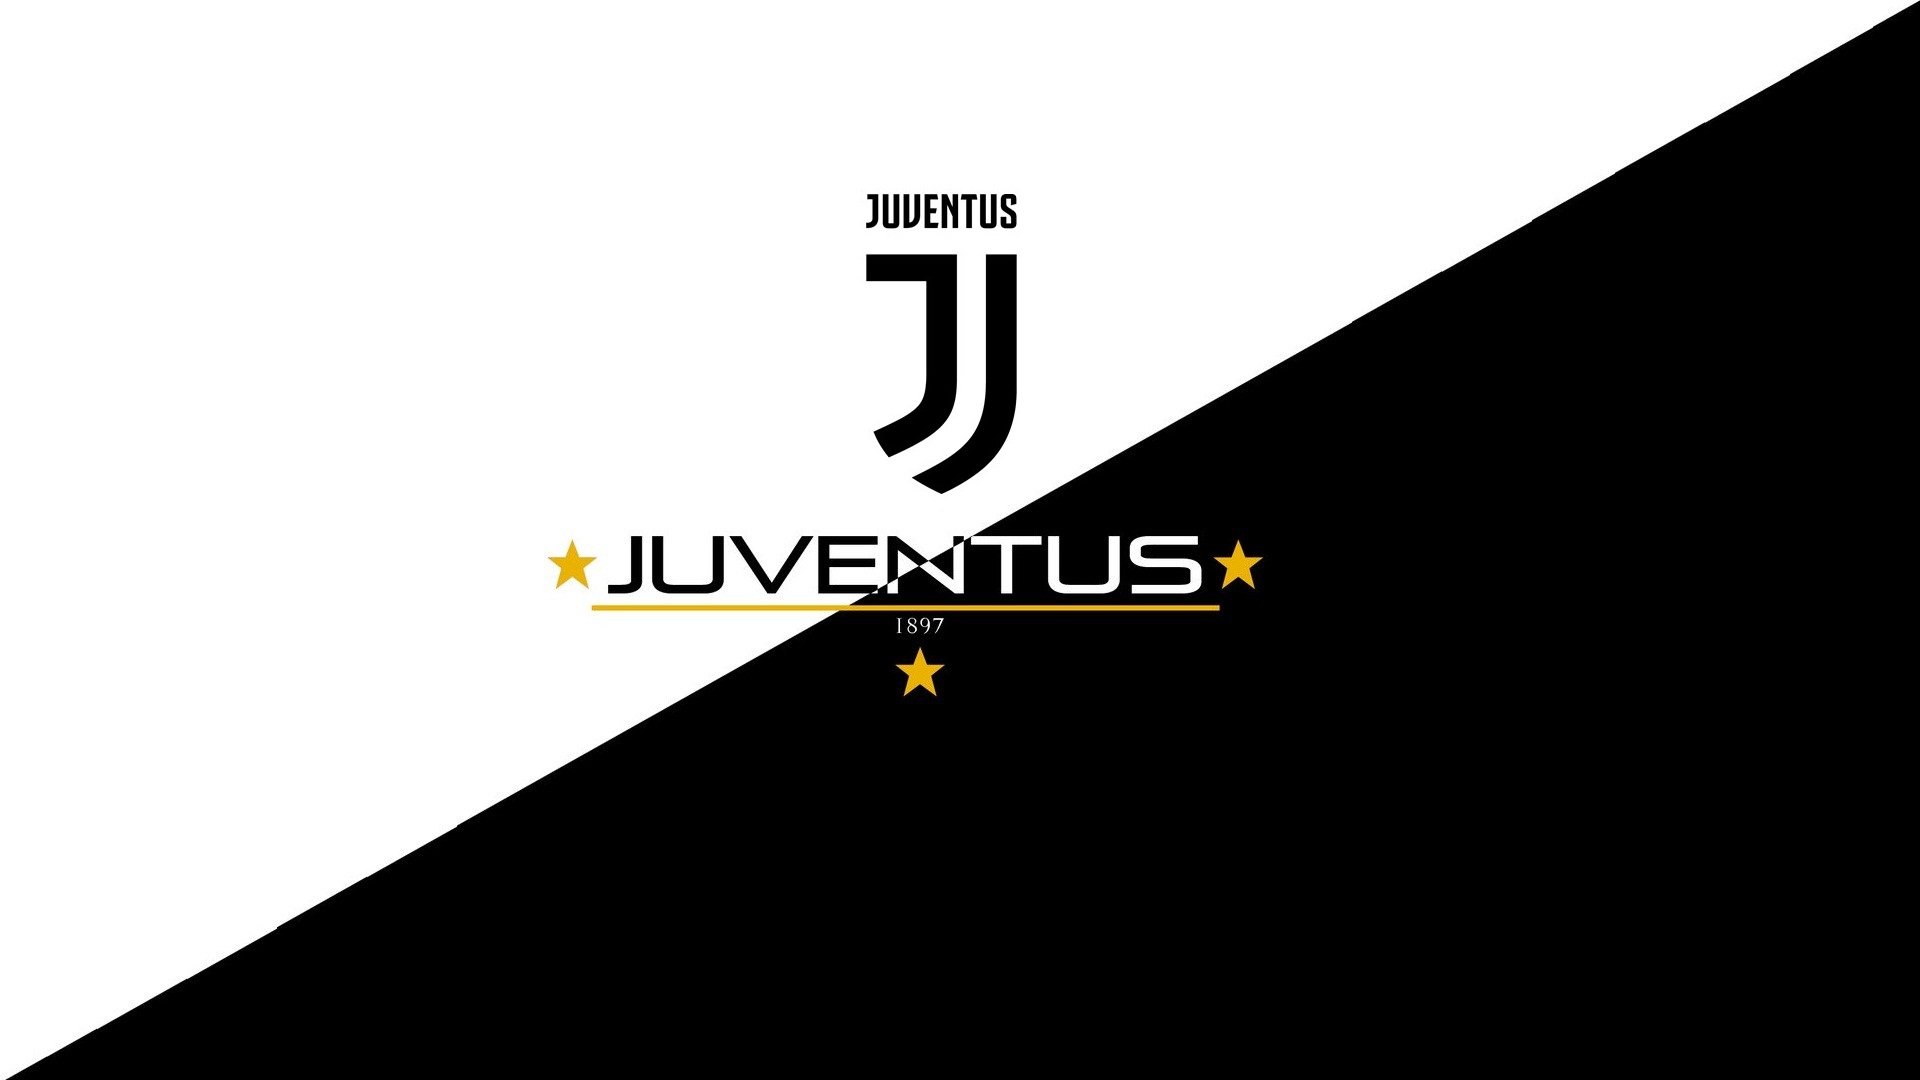 HD Desktop Wallpaper Juventus with image resolution 1920x1080 pixel. You can use this wallpaper as background for your desktop Computer Screensavers, Android or iPhone smartphones